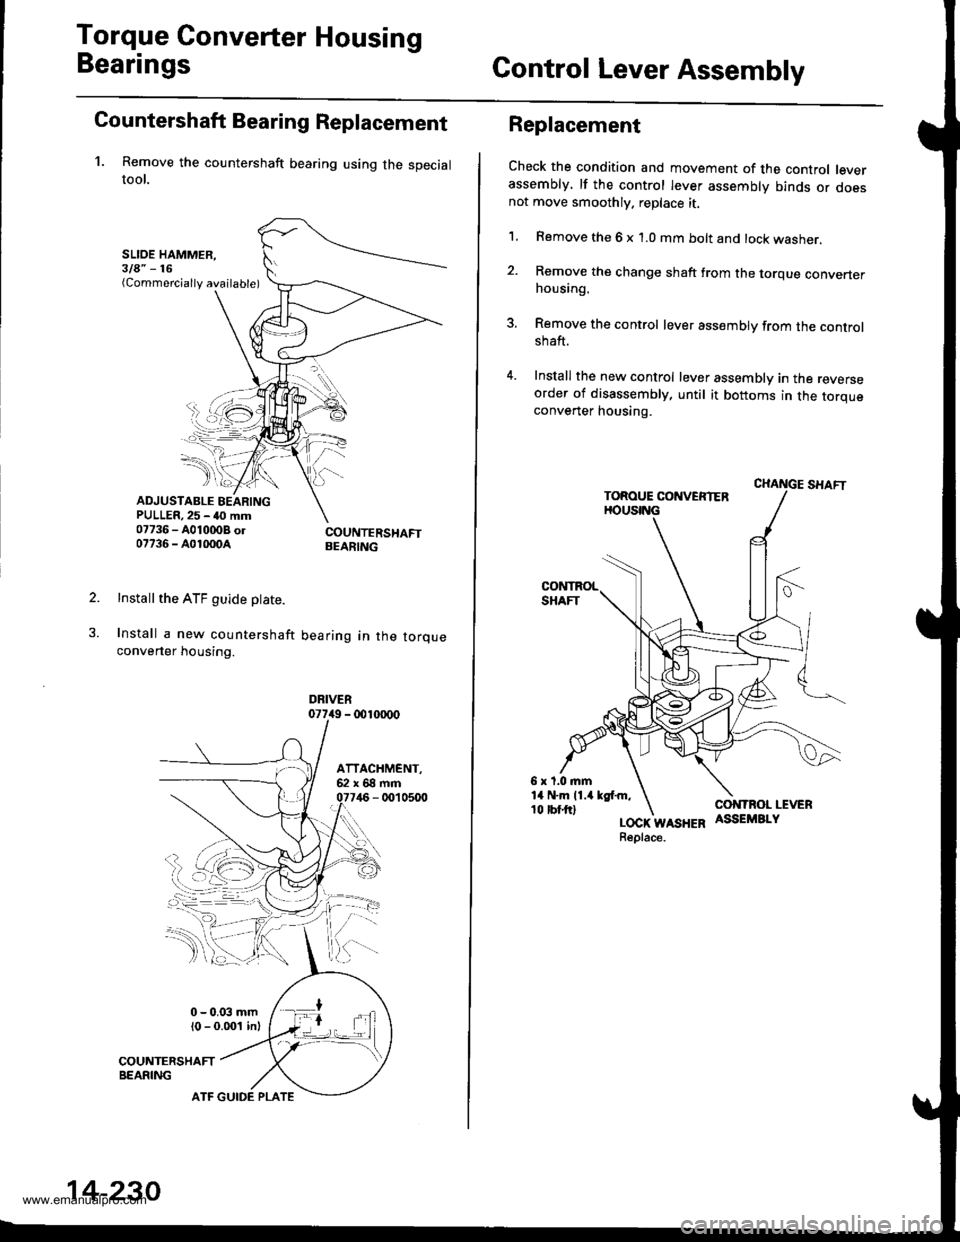 HONDA CR-V 1999 RD1-RD3 / 1.G Service Manual 
Torque Gonverter Housing
BearingsGontrol Lever Assembly
Countershaft Bearing Replacement
1. Remove the countershaft bearing using the specialtool.
SLIOE HAMMER,3la" -16(Commercially available)
ADJUST